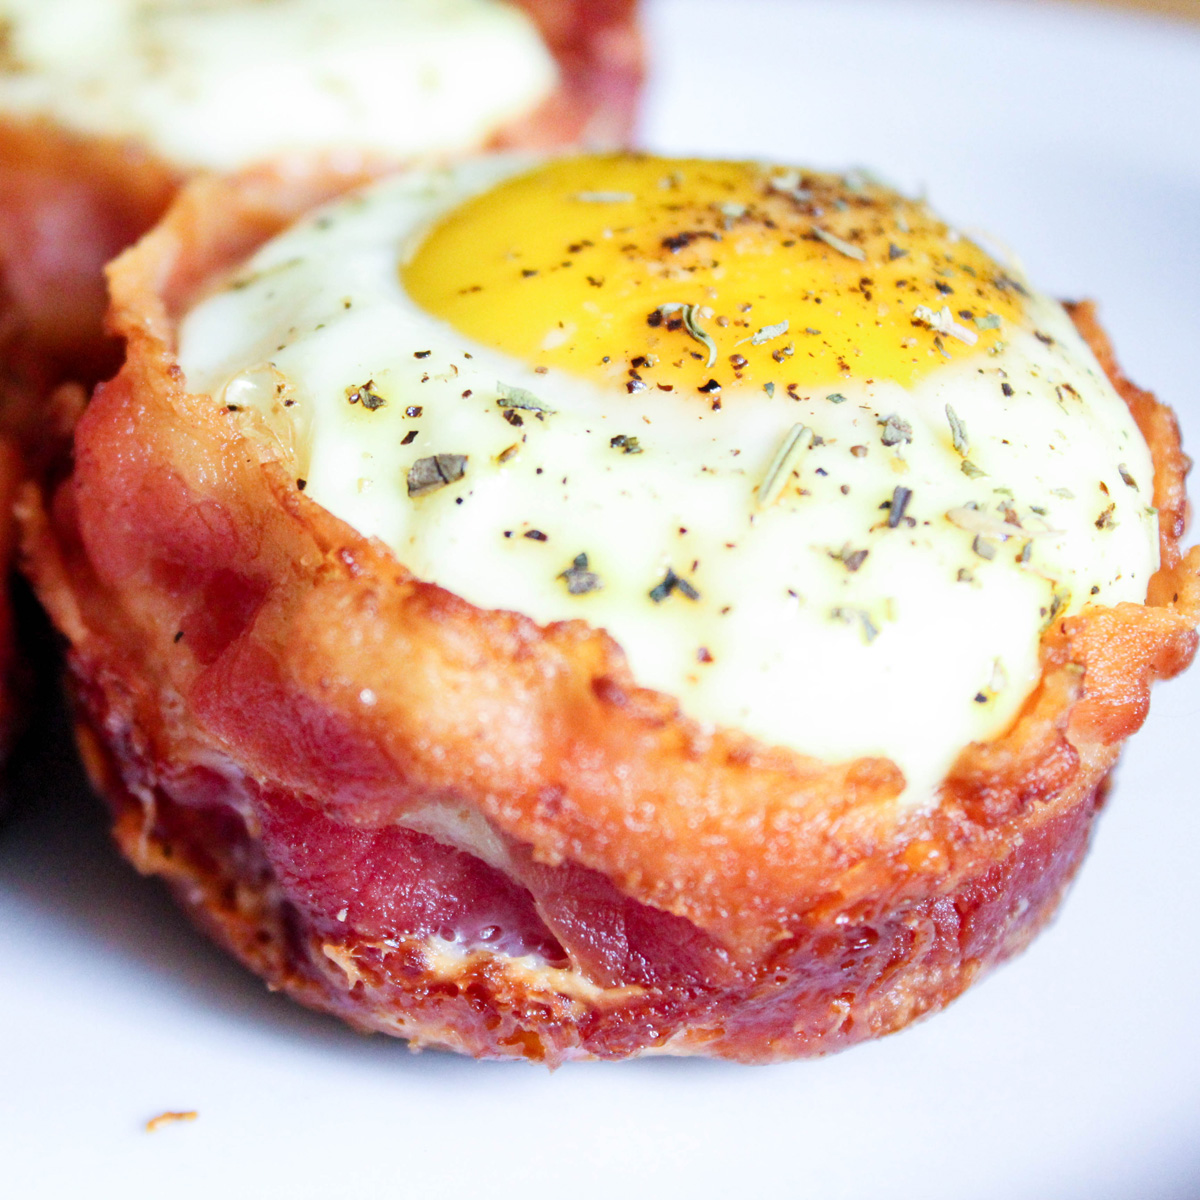 https://dailydishrecipes.com/wp-content/uploads/2012/04/Bacon-Egg-Muffin-Cups-Featured-Image.jpg